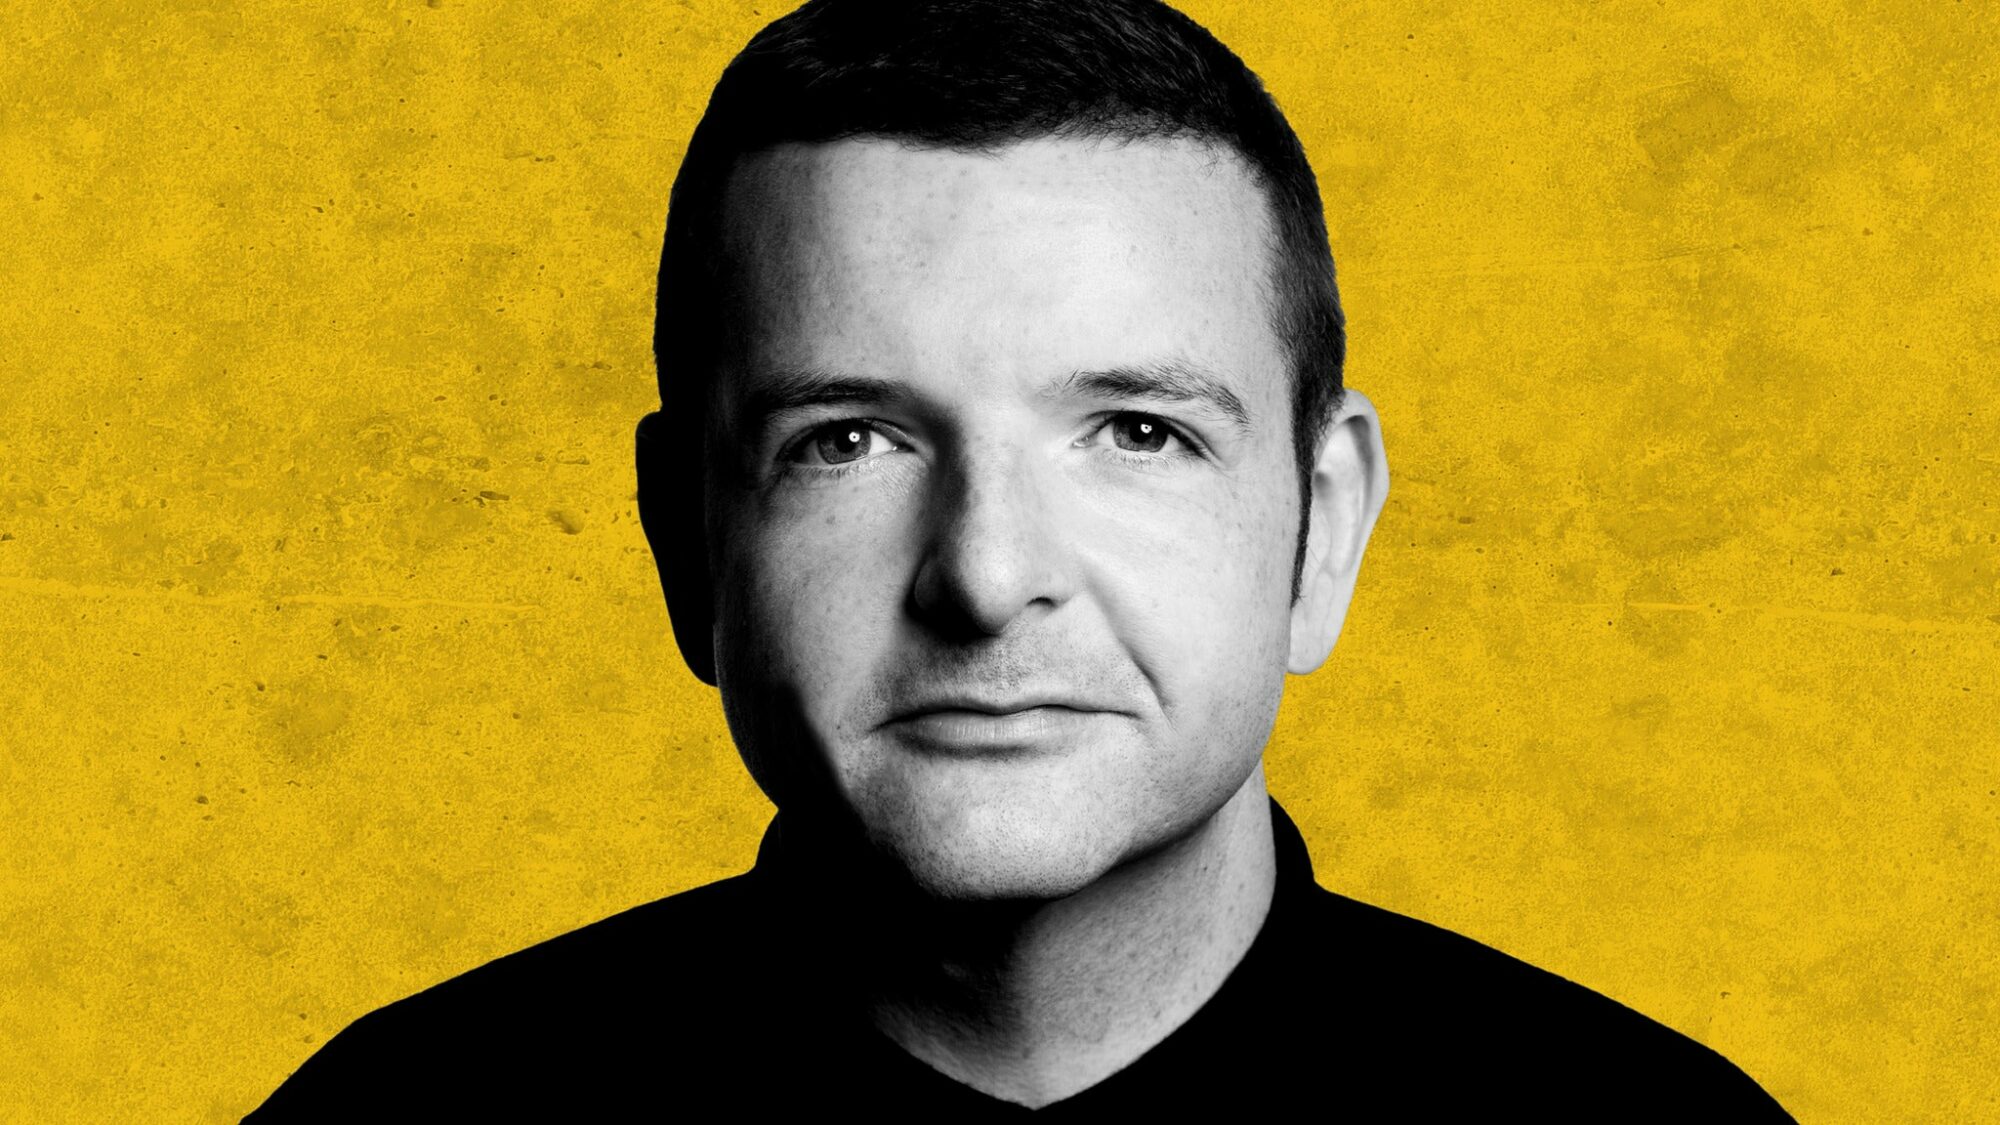 Image name Kevin Bridges The Overdue Catch Up at Leeds Grand Theatre Leeds the 9 image from the post Kevin Bridges: The Overdue Catch-Up at Leeds Grand Theatre, Leeds in Yorkshire.com.